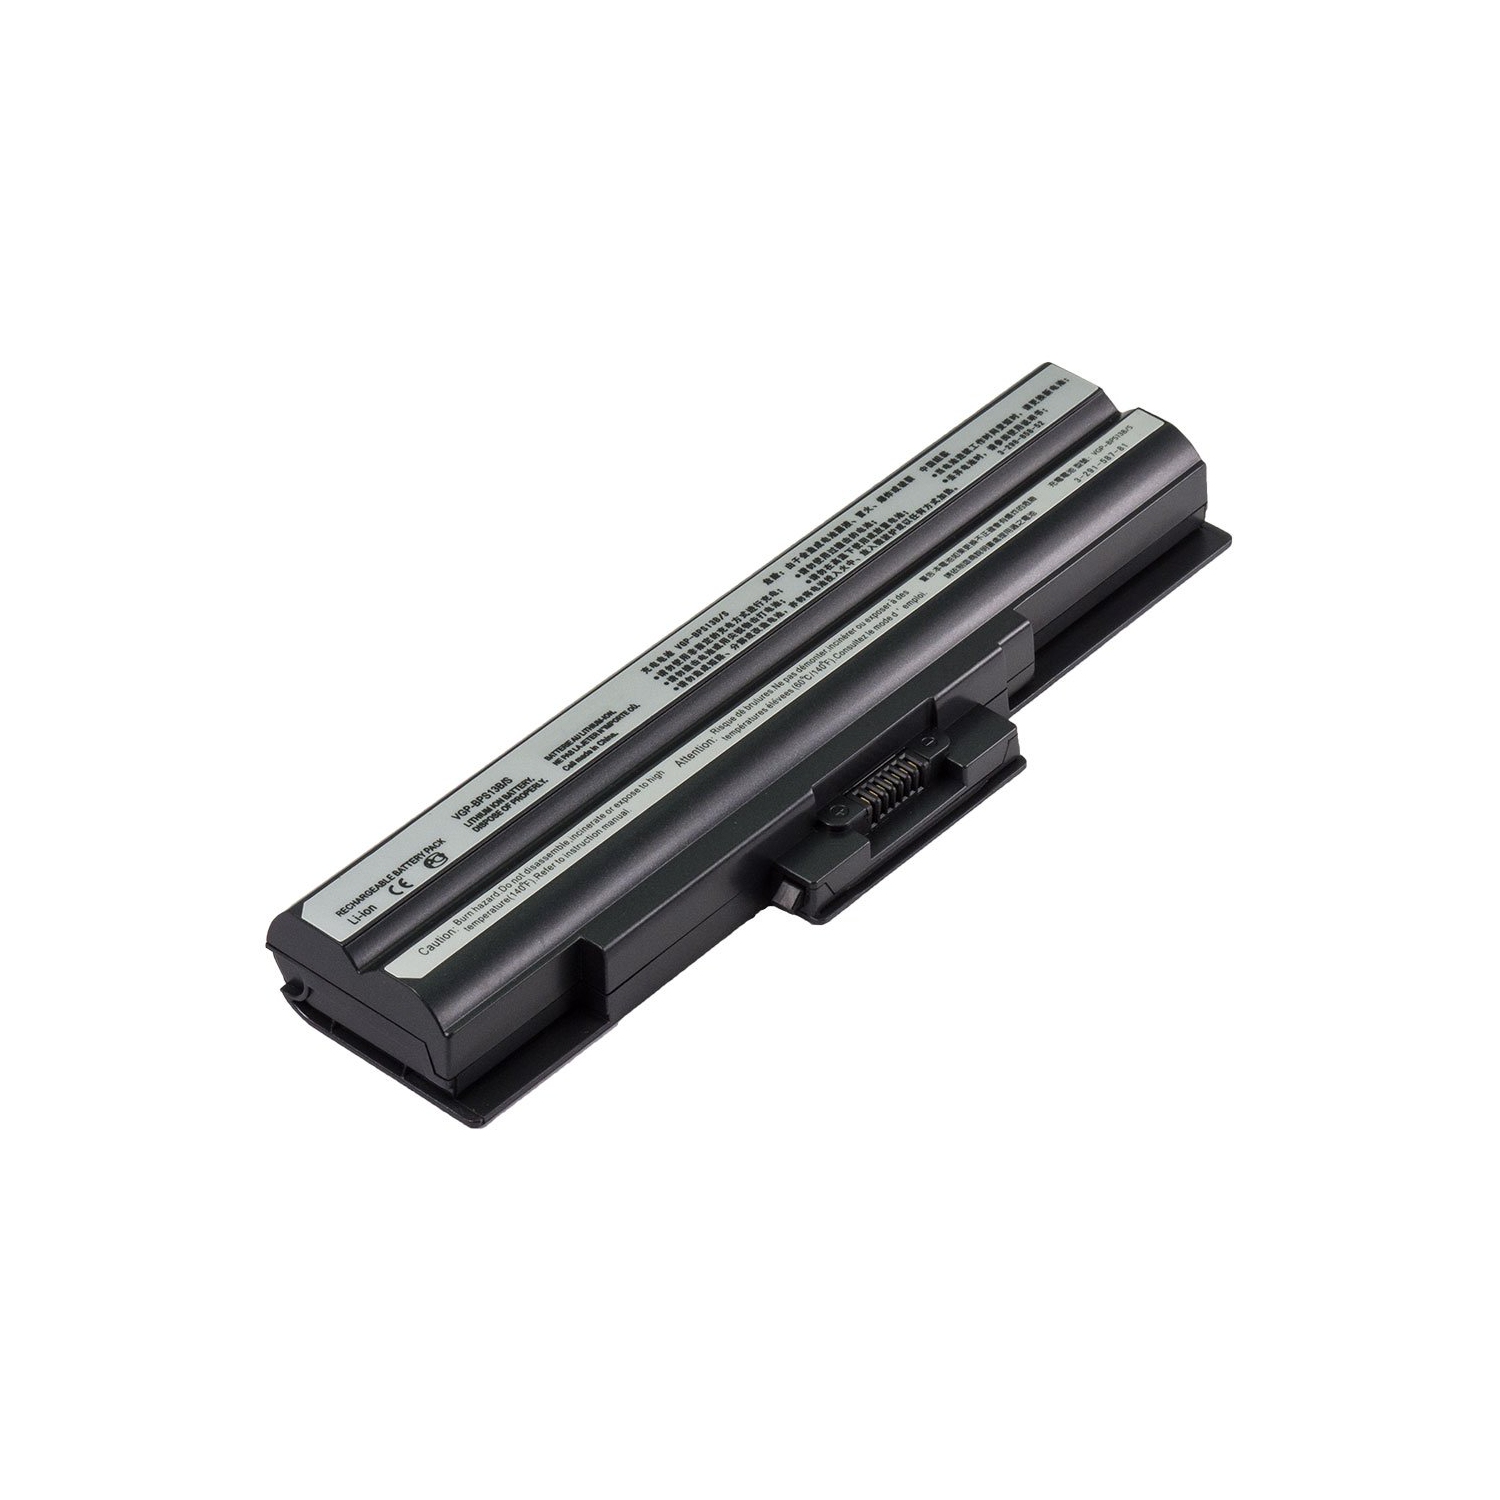 Laptop Battery Replacement for Sony VAIO VGN-SR250J/B, VGP-BPS13, VGP-BPS13/S, VGP-BPS13A/Q, VGP-BPS13B/B, VGP-BSP13/S